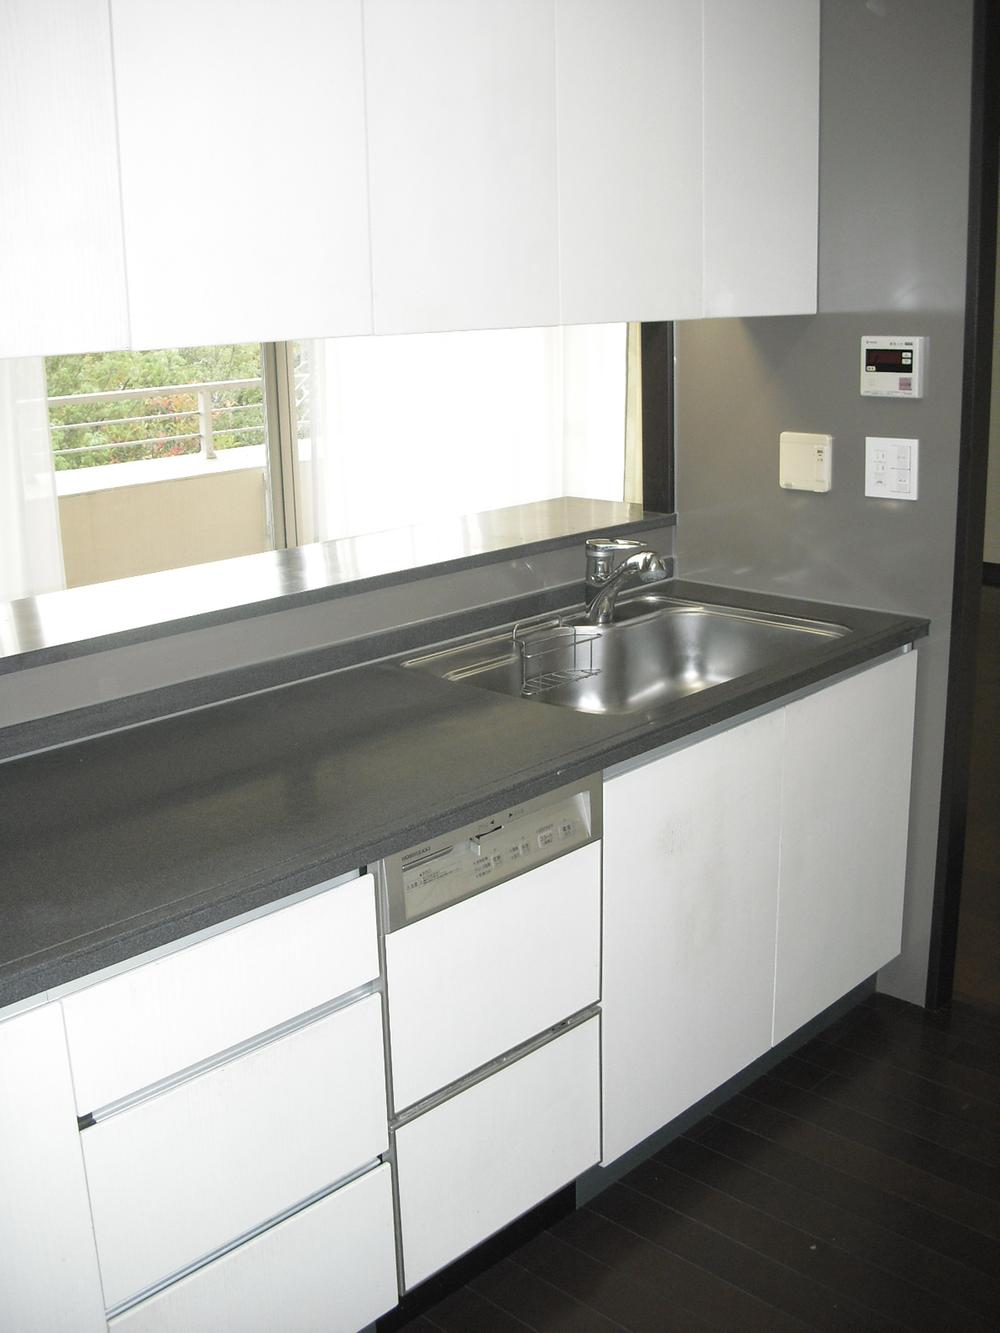 Kitchen. Counter Kitchen. Dishwasher, Also easily done cuisine with disposer.